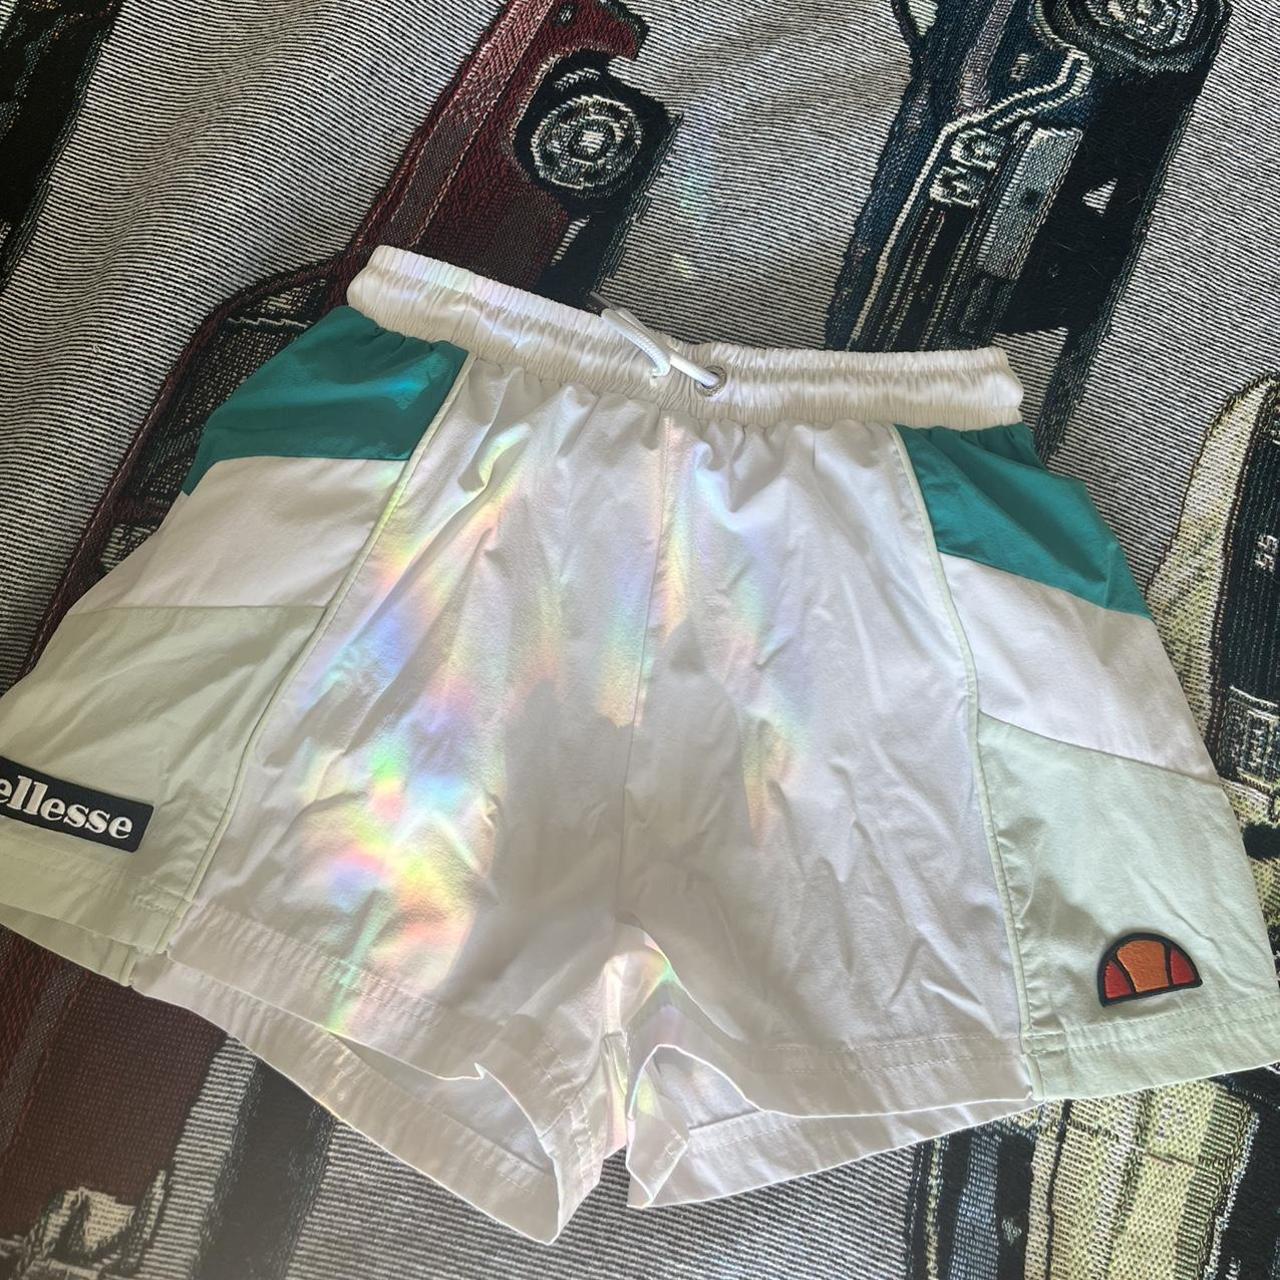 Ellesse Women's White and Green Shorts